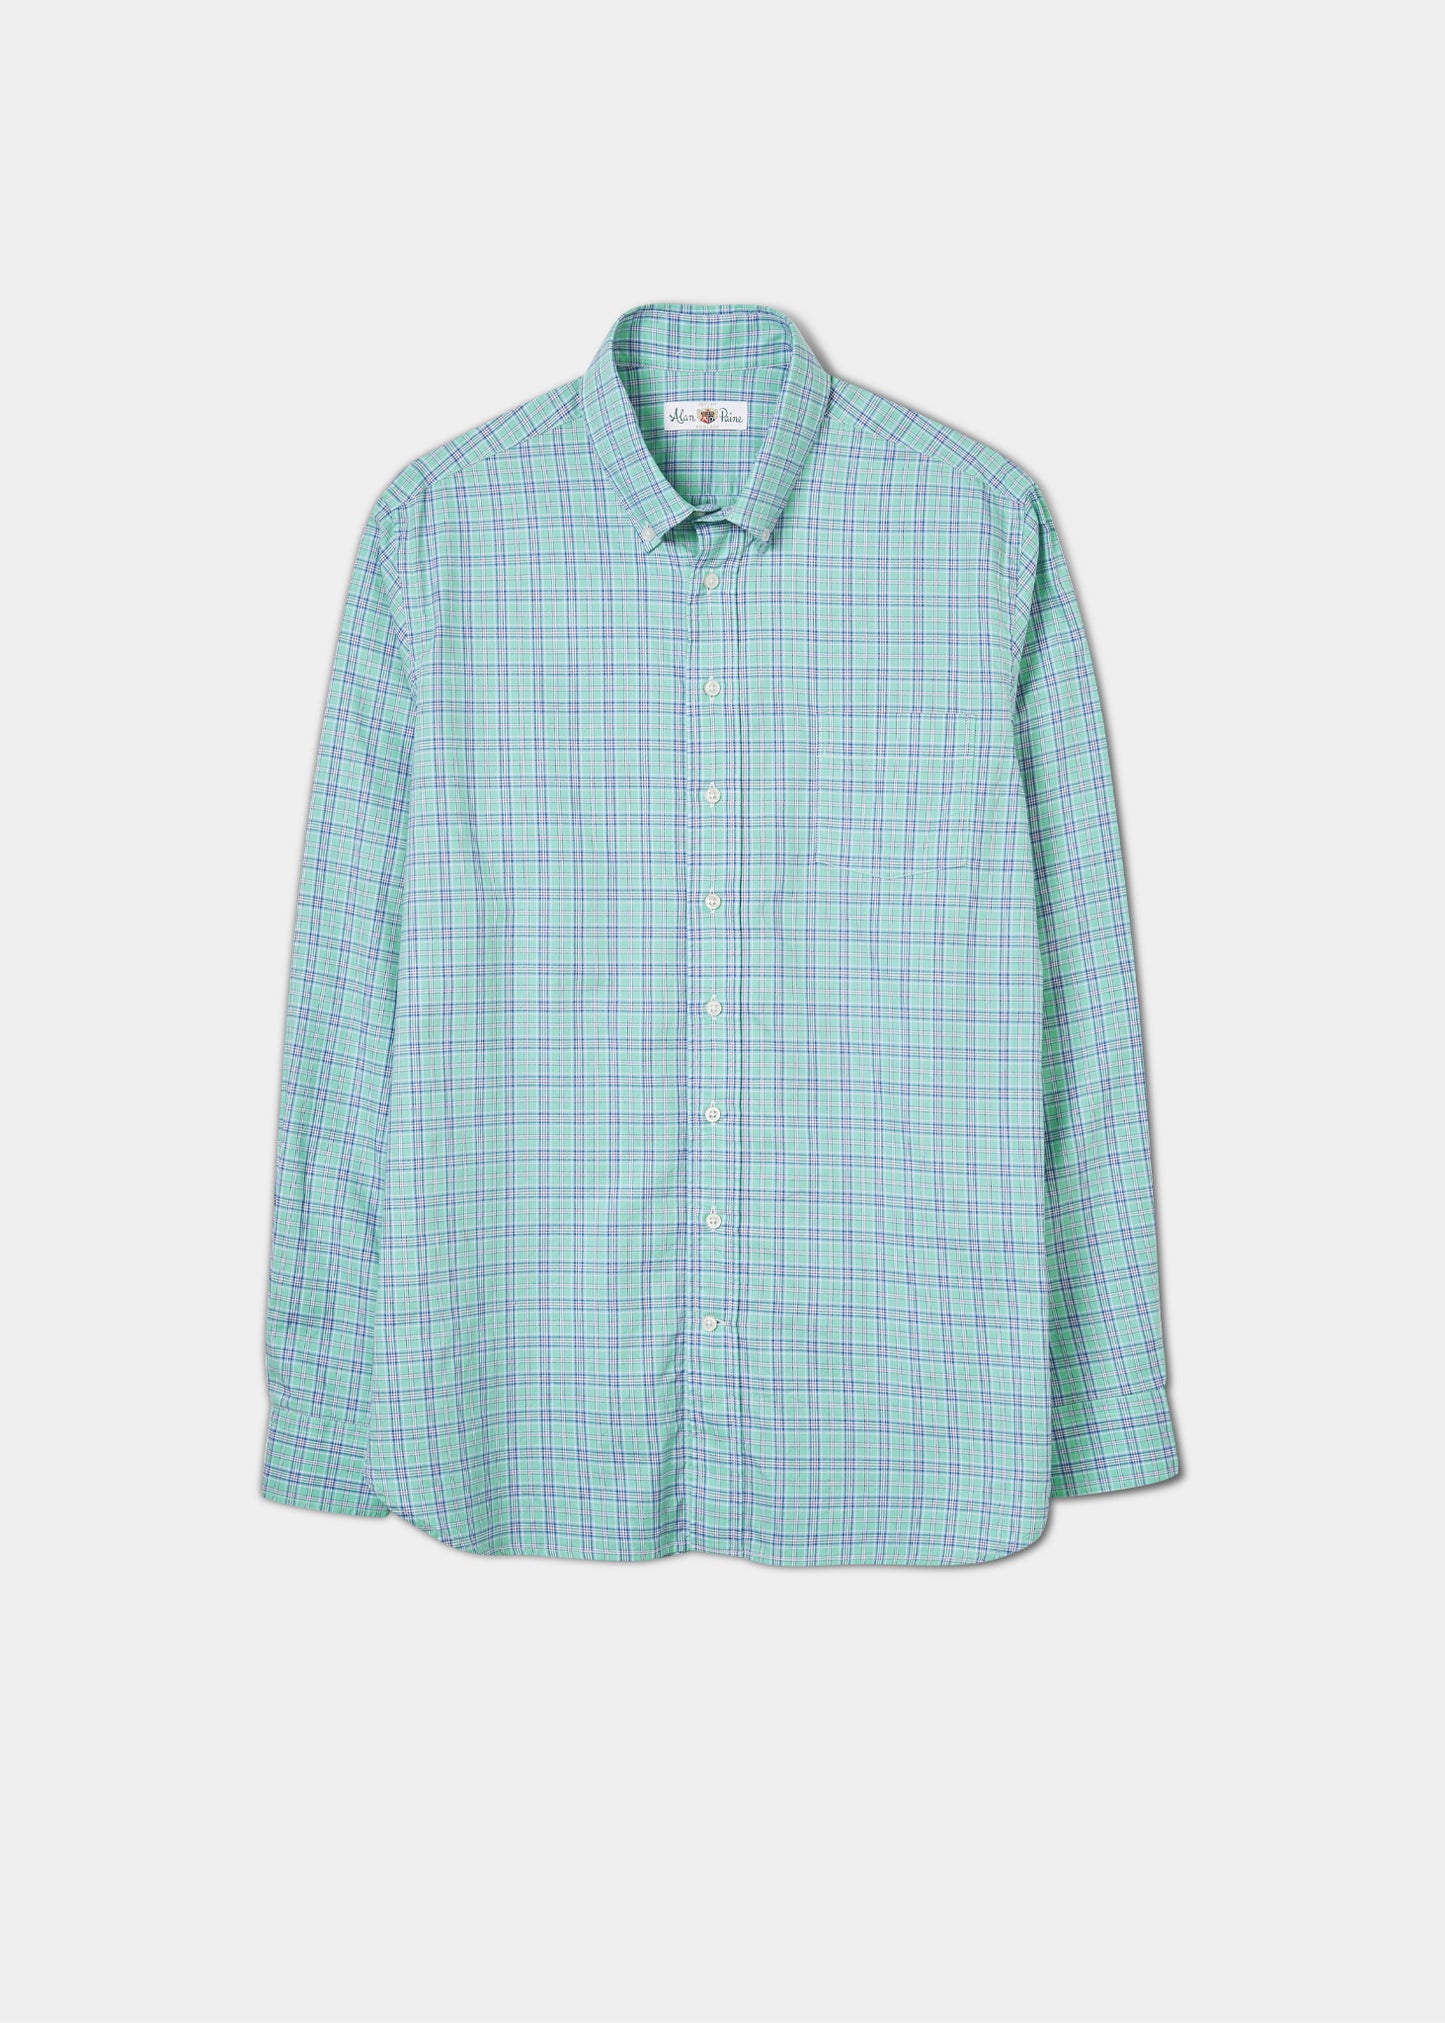 Fleetwood Cotton Patterned Shirt - Classic Fit